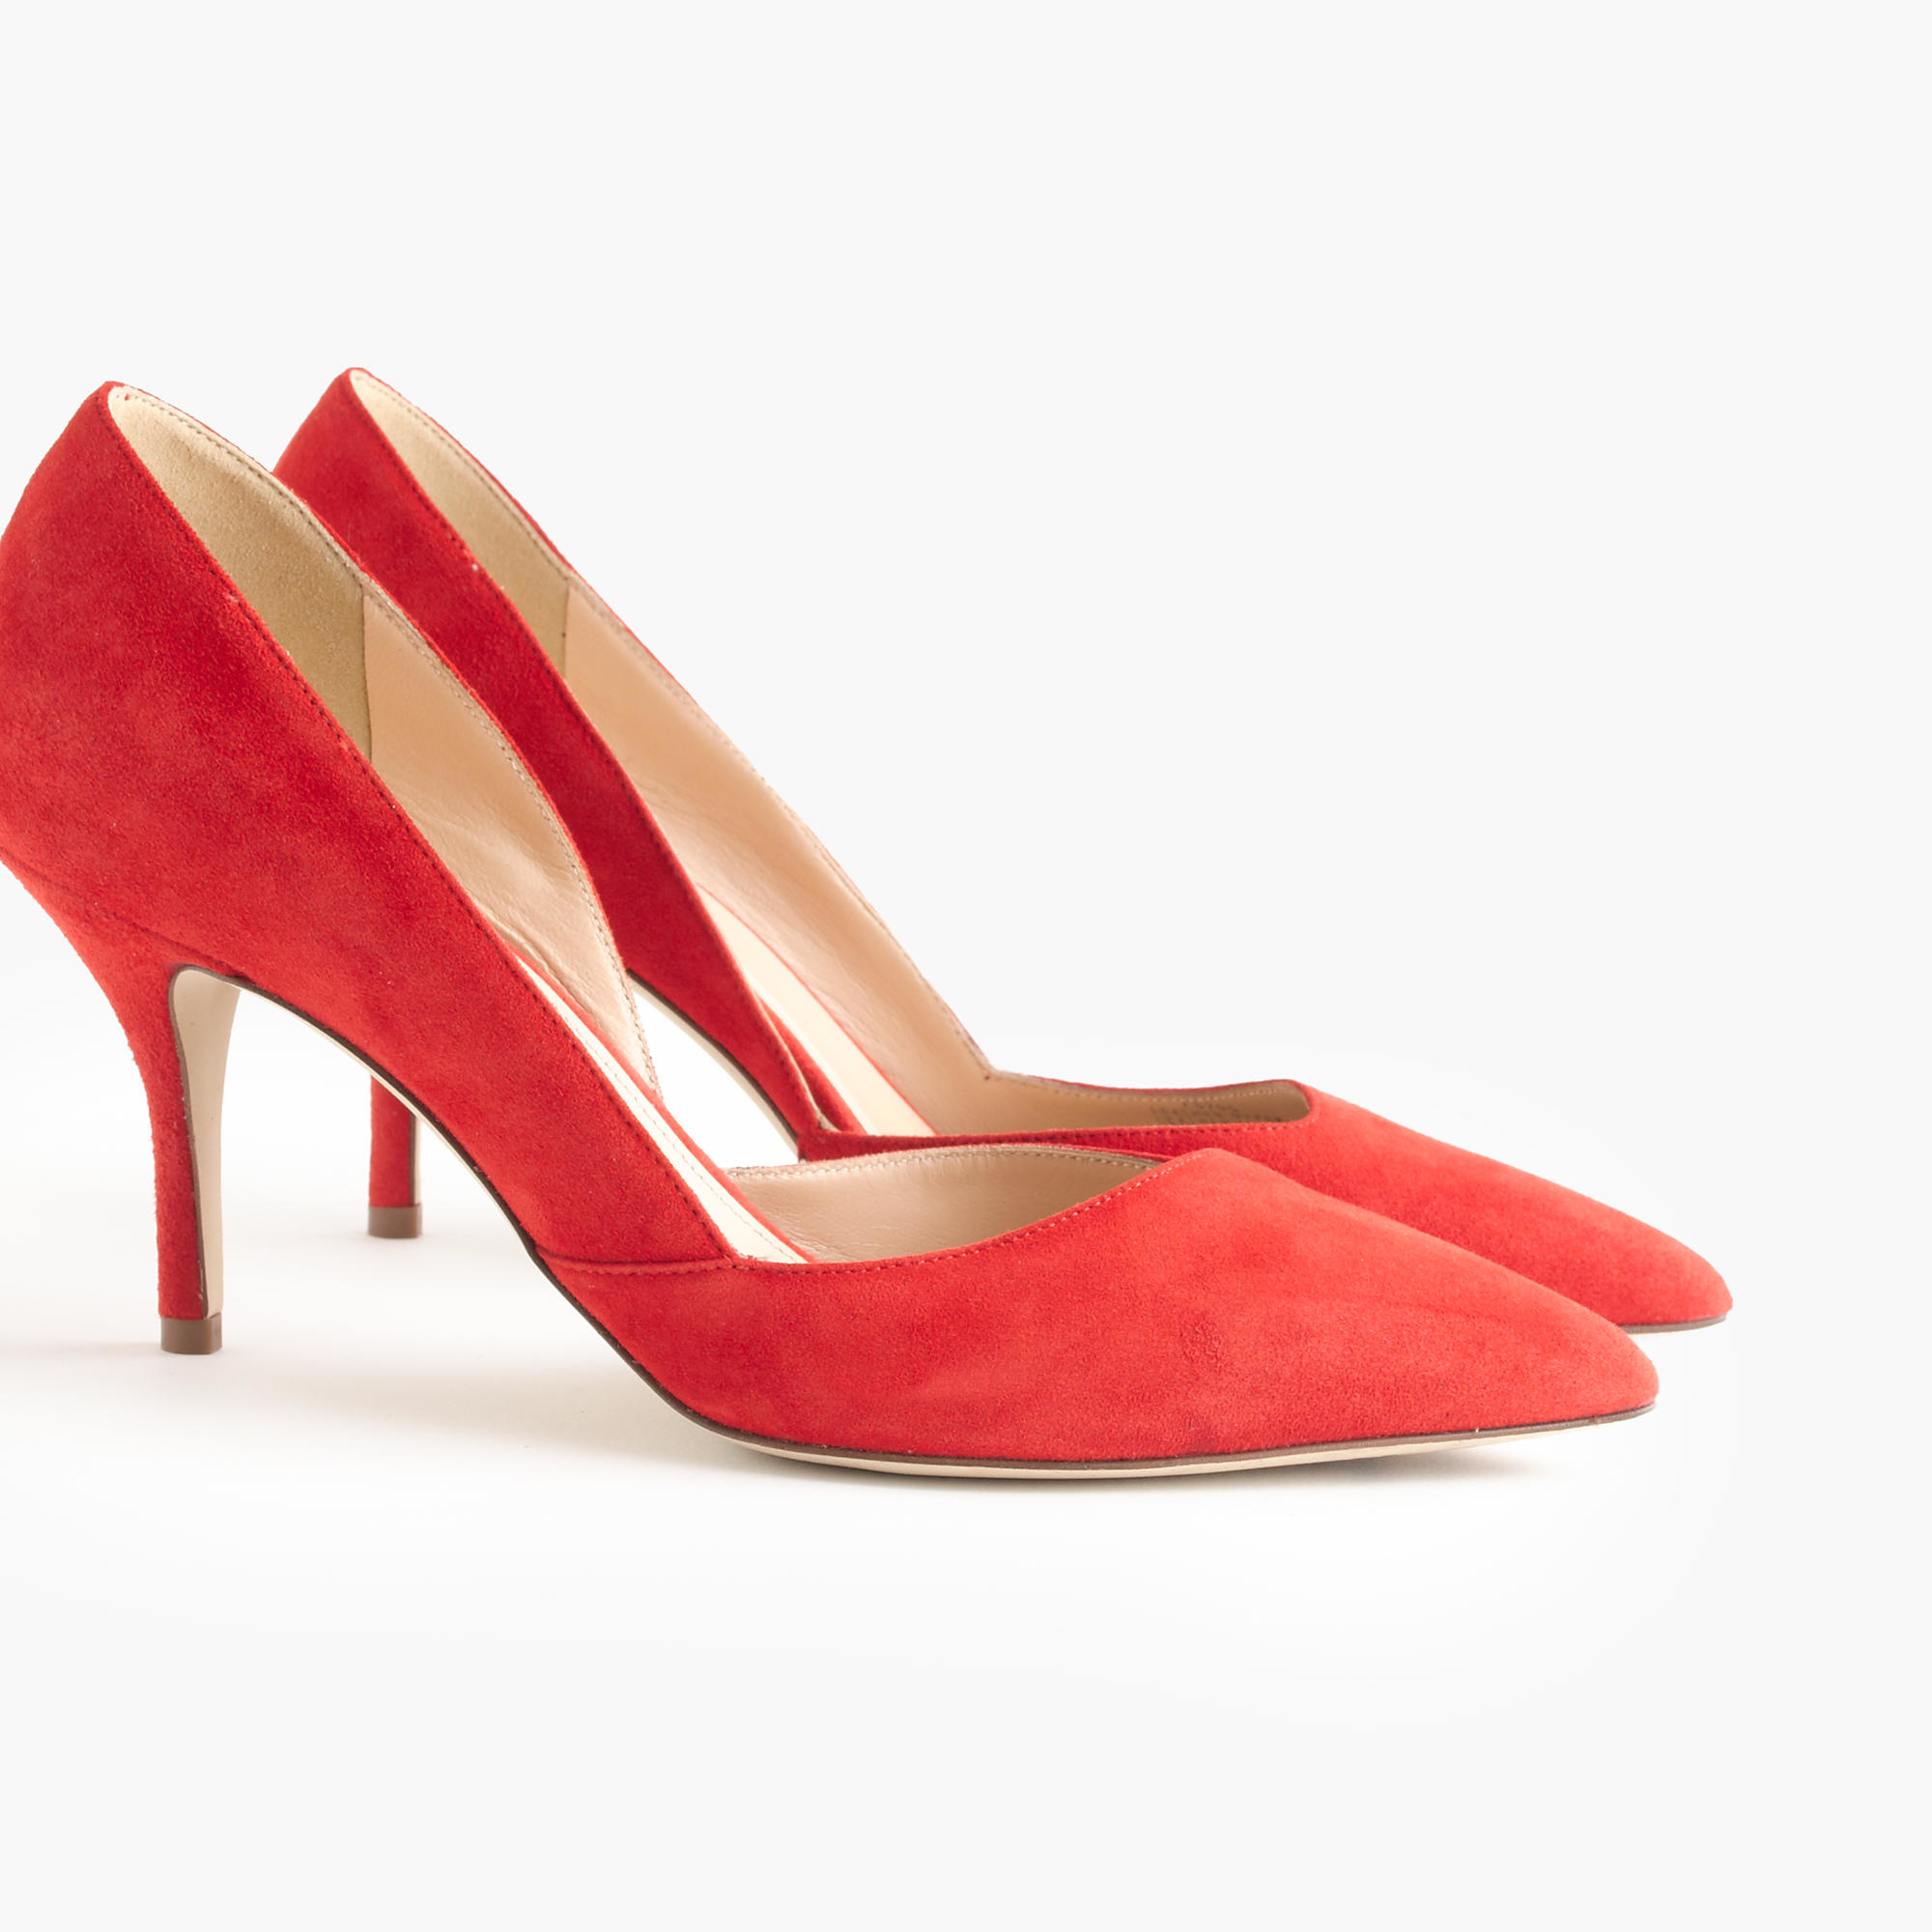 J.crew Colette Suede D'orsay Pumps in Red (california poppy) | Lyst